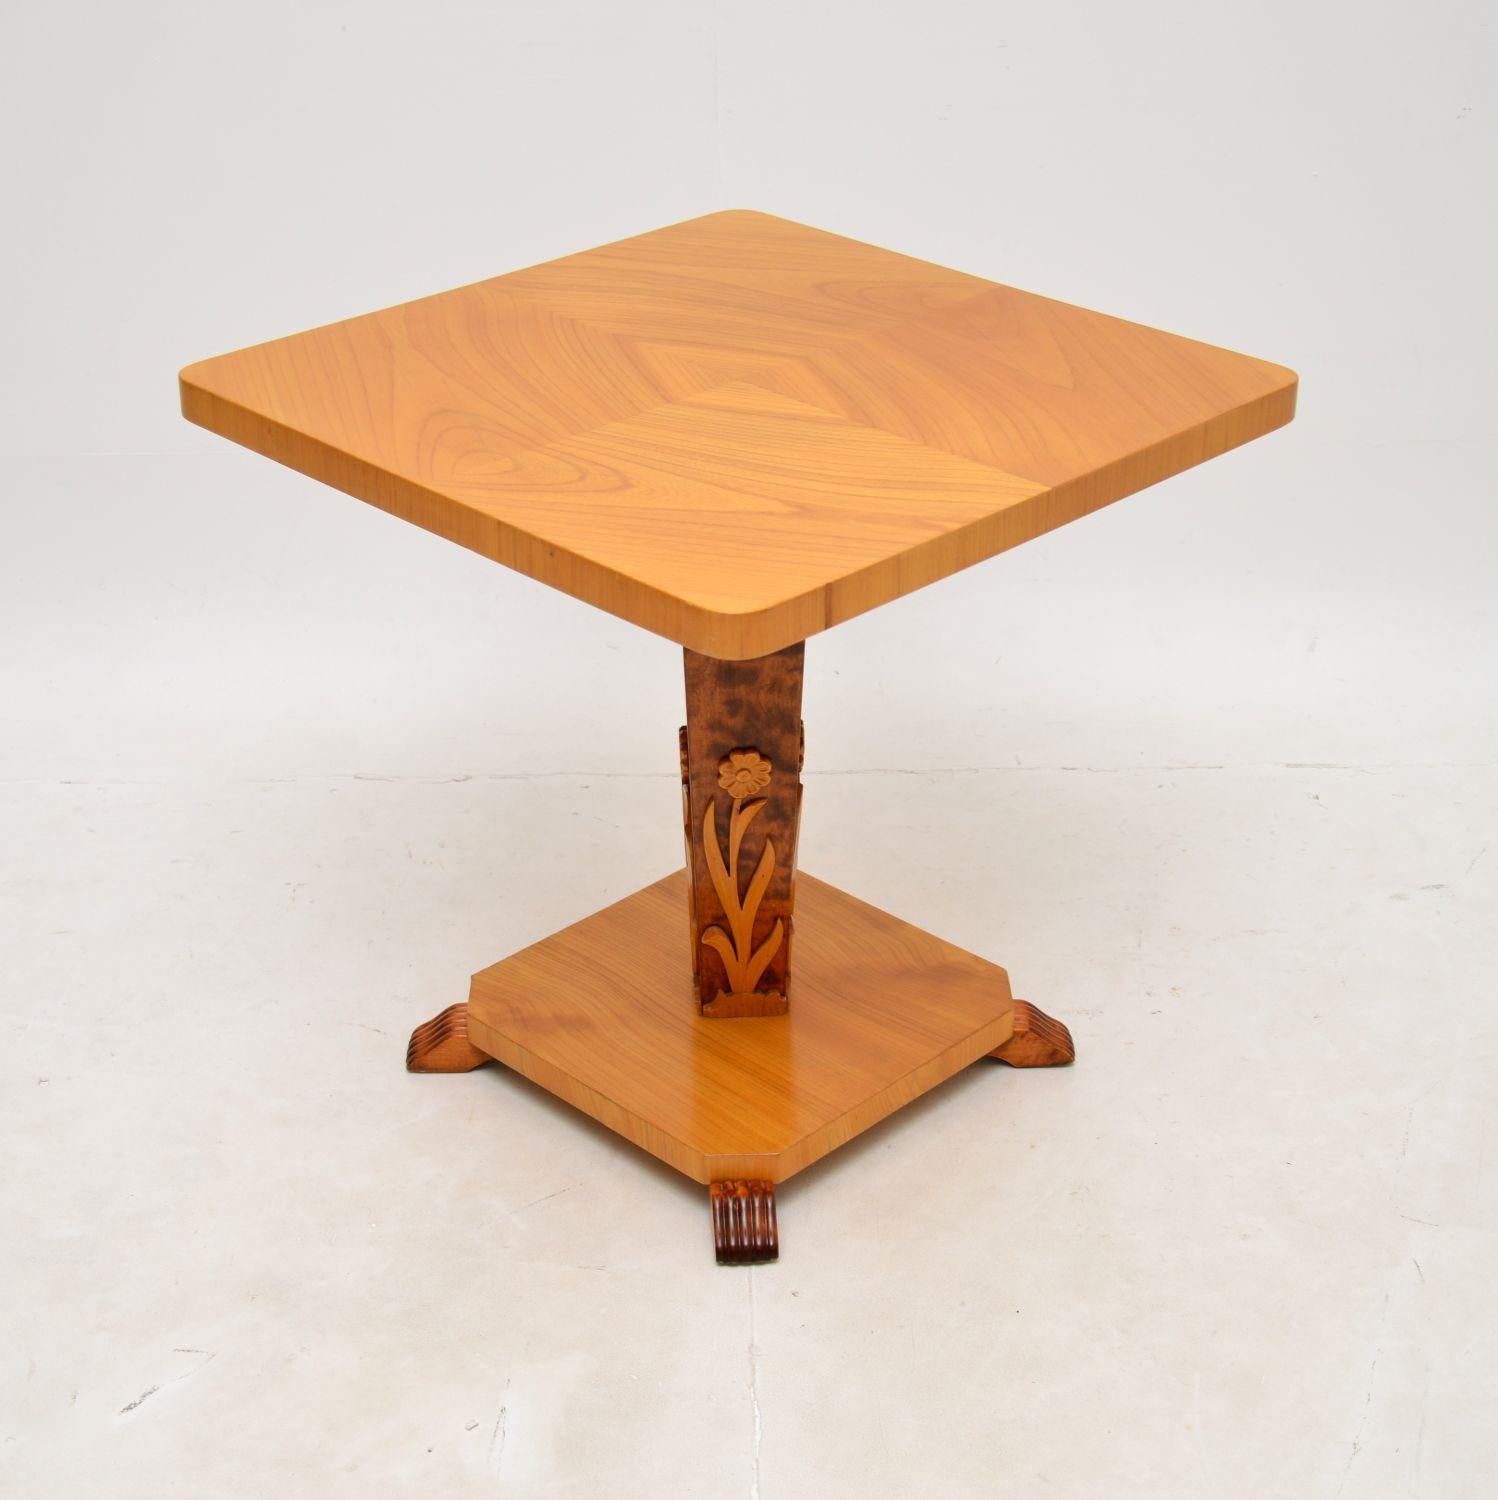 A stunning vintage Swedish Art Deco satin birch and elm occasional table. This was recently imported from Sweden, it dates from around the 1950’s.

This is of superb quality and has a beautiful design. The square elm top sits on a satin birch column